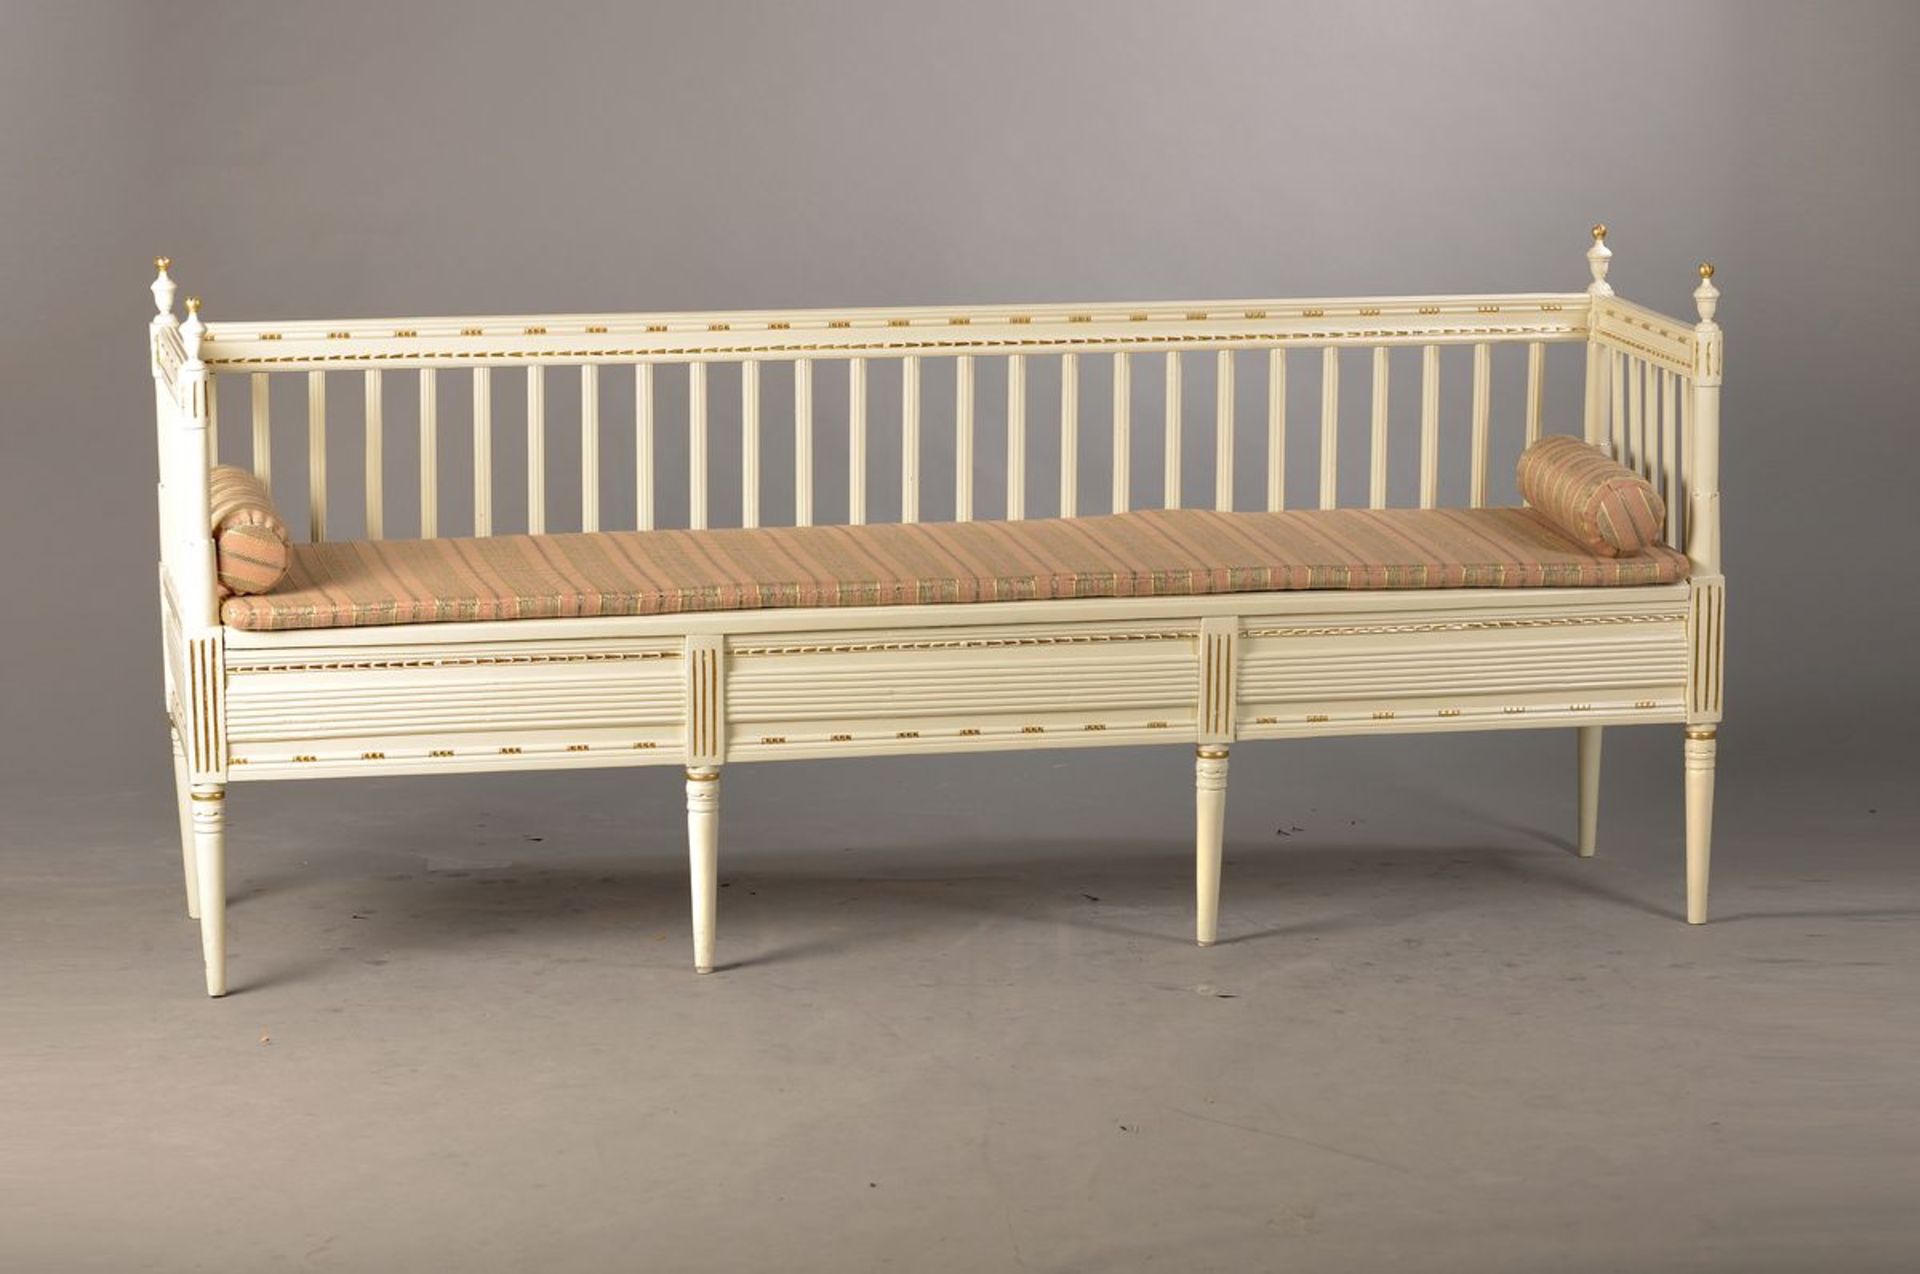 bench, France, around 1900, white and gold painting, seat pillow, rest., neo-classical decor, one